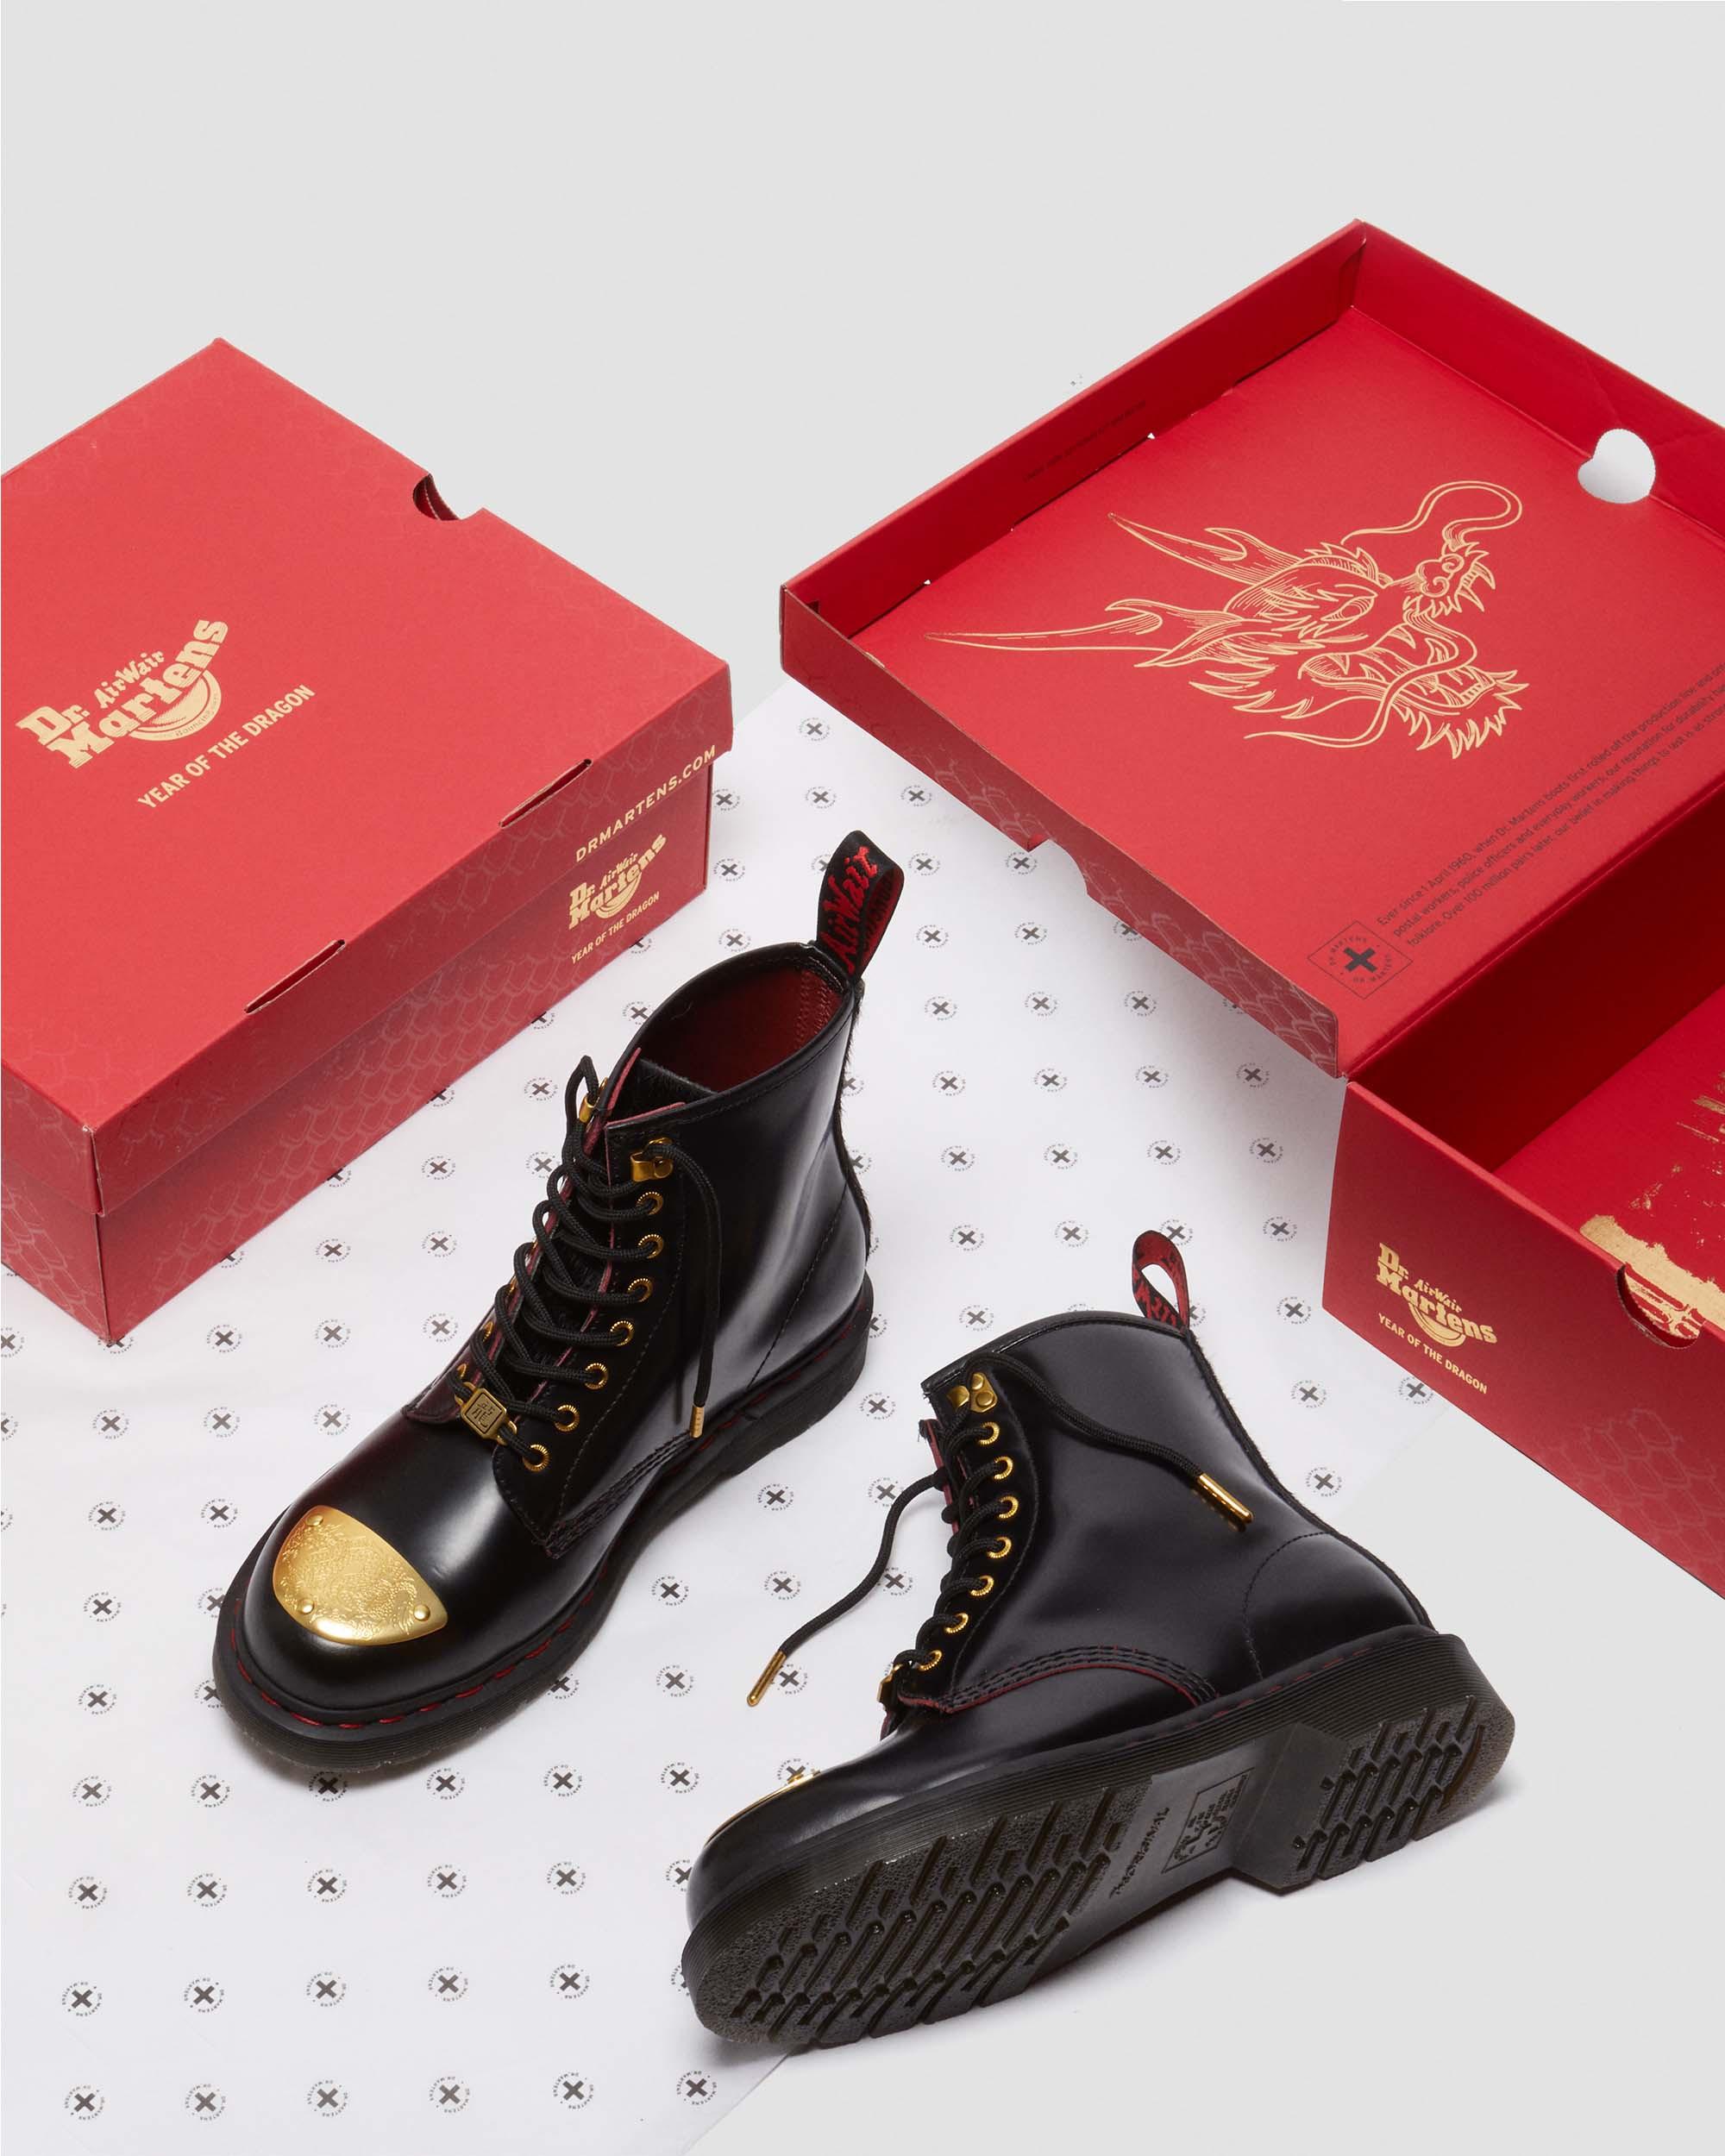 steinDR. MARTENS “YEAR OF THE DRAGON限定